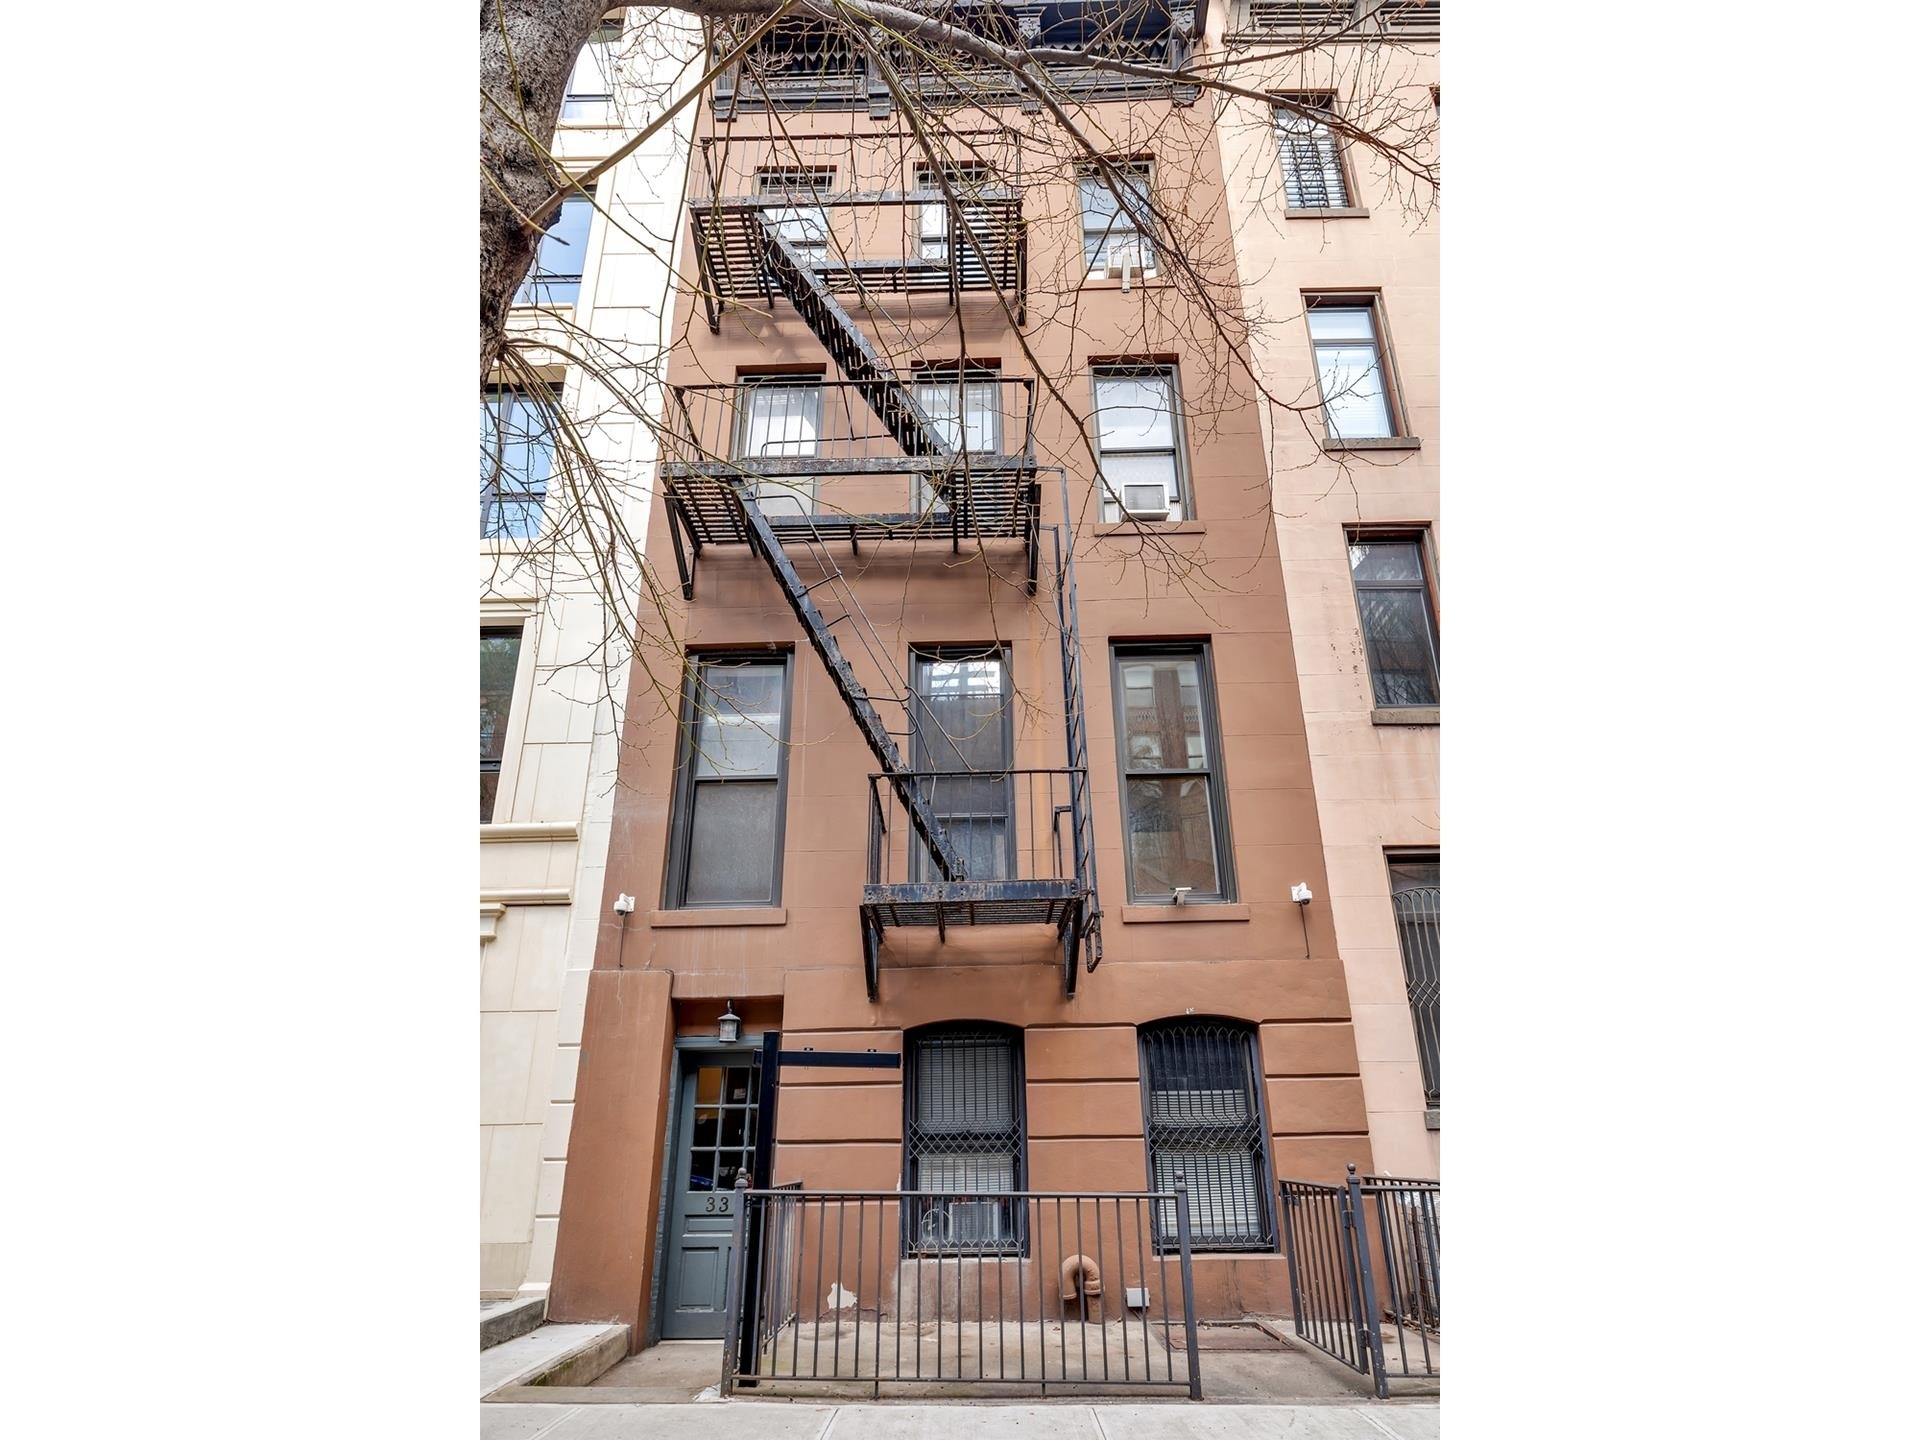 Property at 339 E 82ND ST, TOWNHOUSE Yorkville, New York, New York 10028